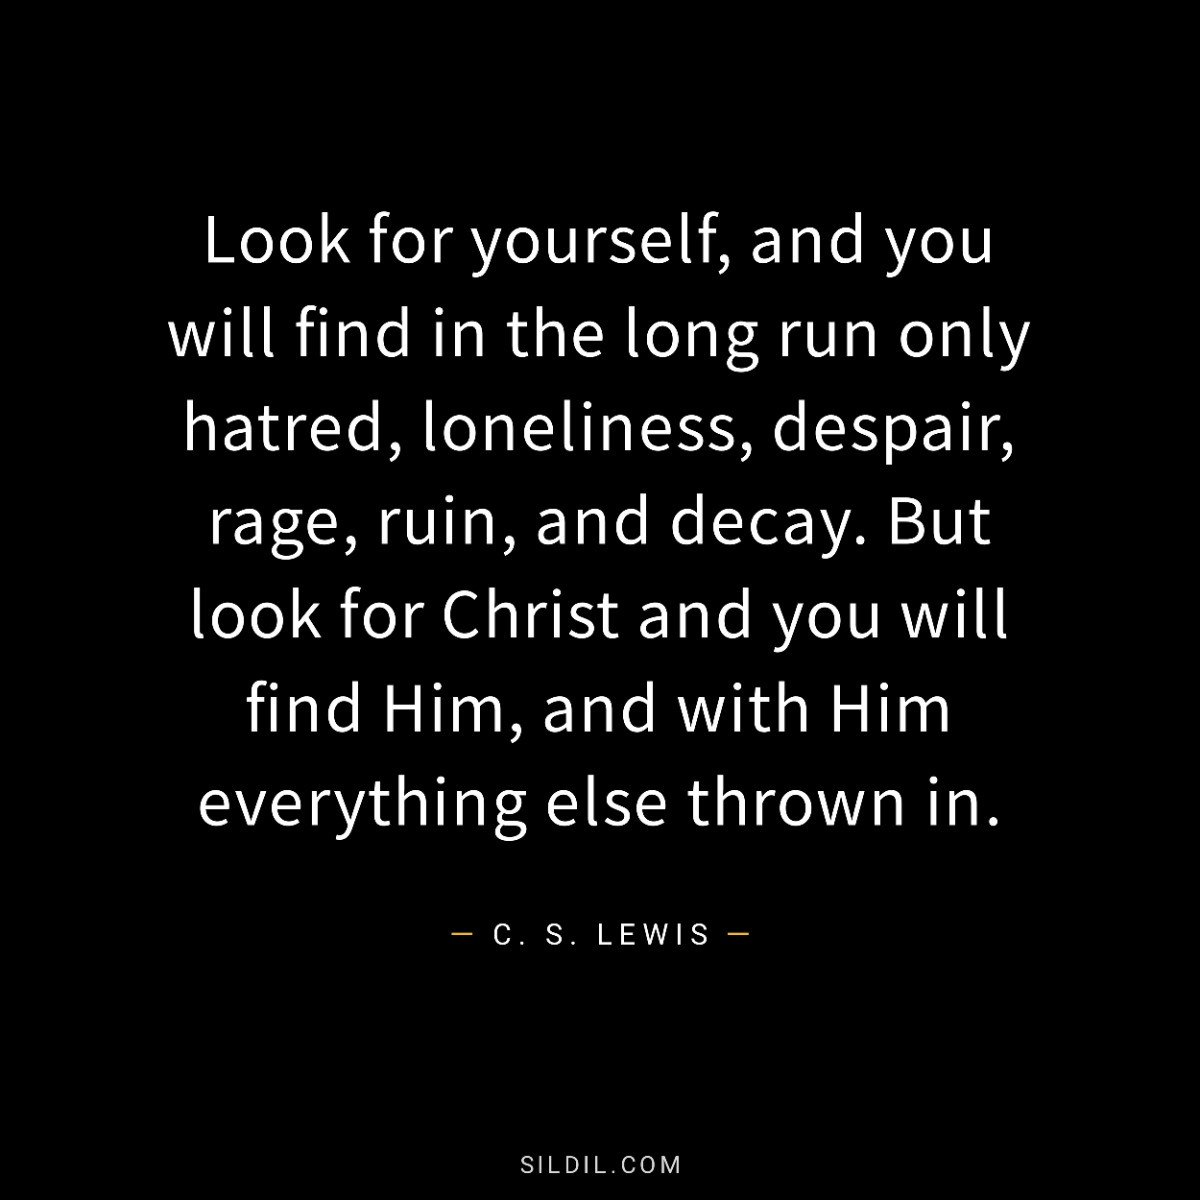 Look for yourself, and you will find in the long run only hatred, loneliness, despair, rage, ruin, and decay. But look for Christ and you will find Him, and with Him everything else thrown in.